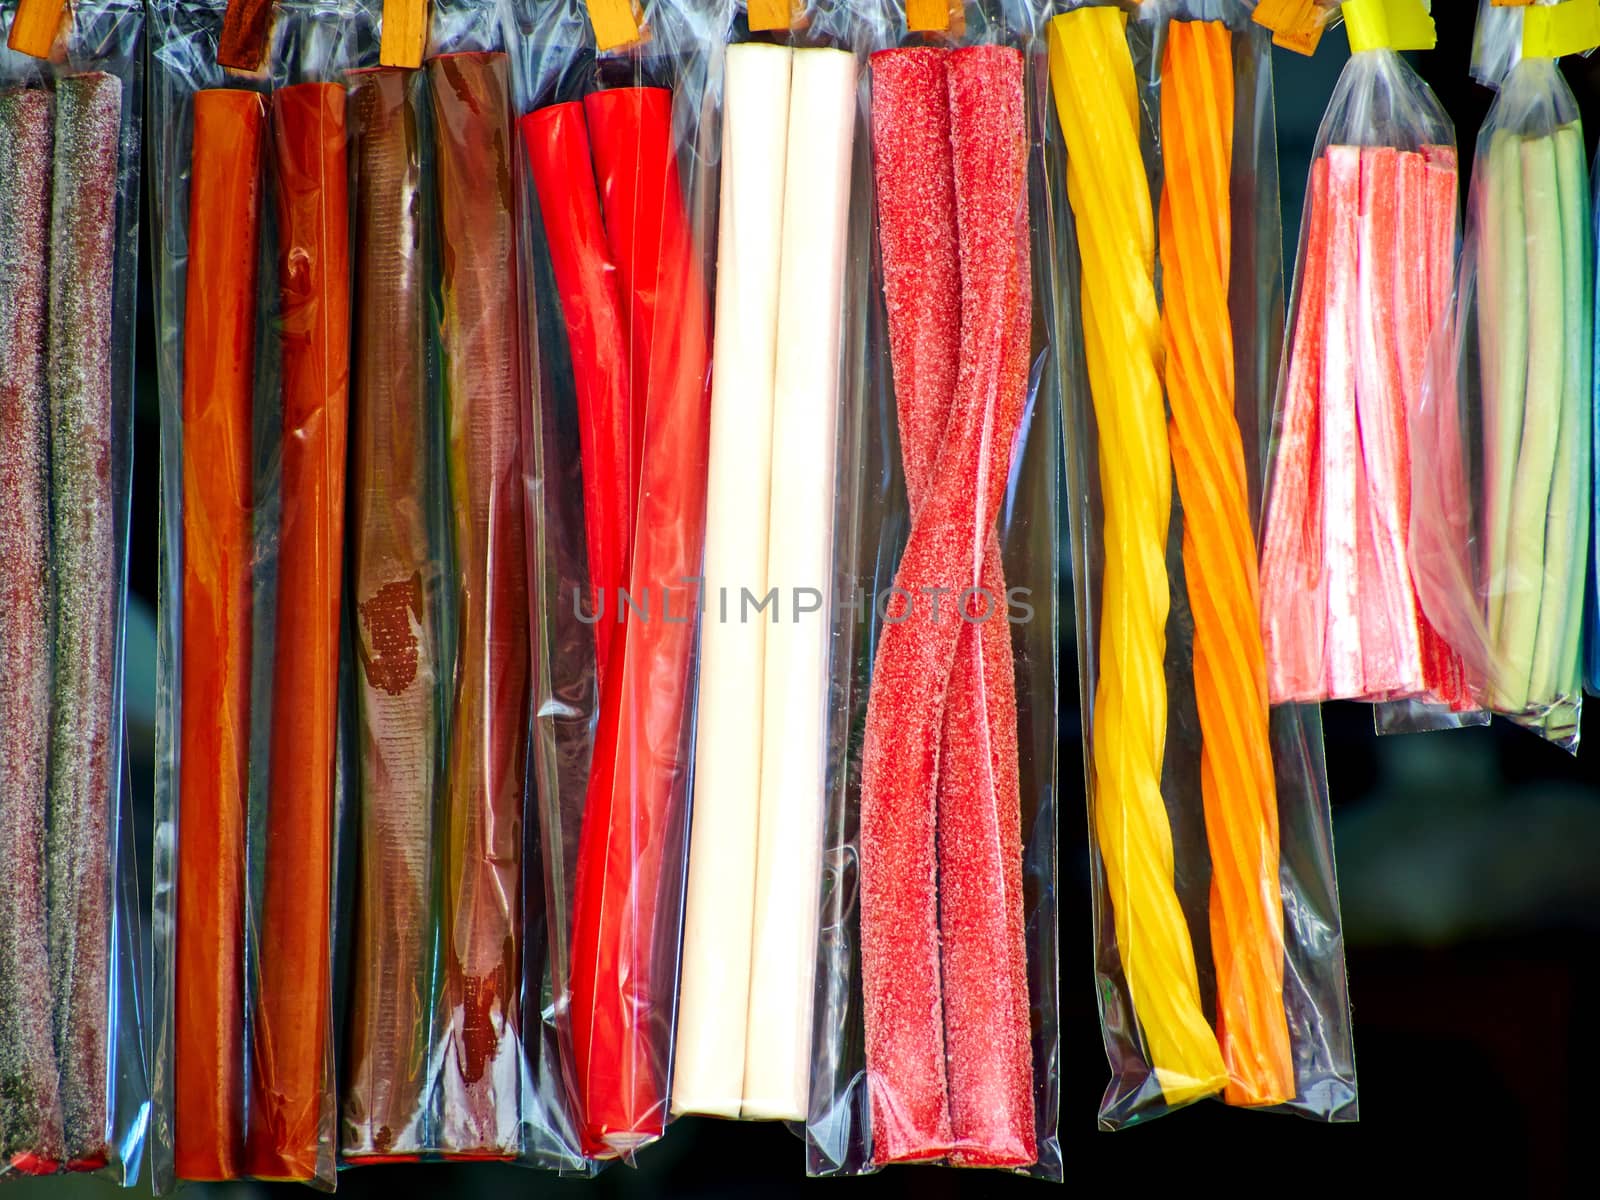 Soft sticks bundle colored licorice candies on display in a market shop